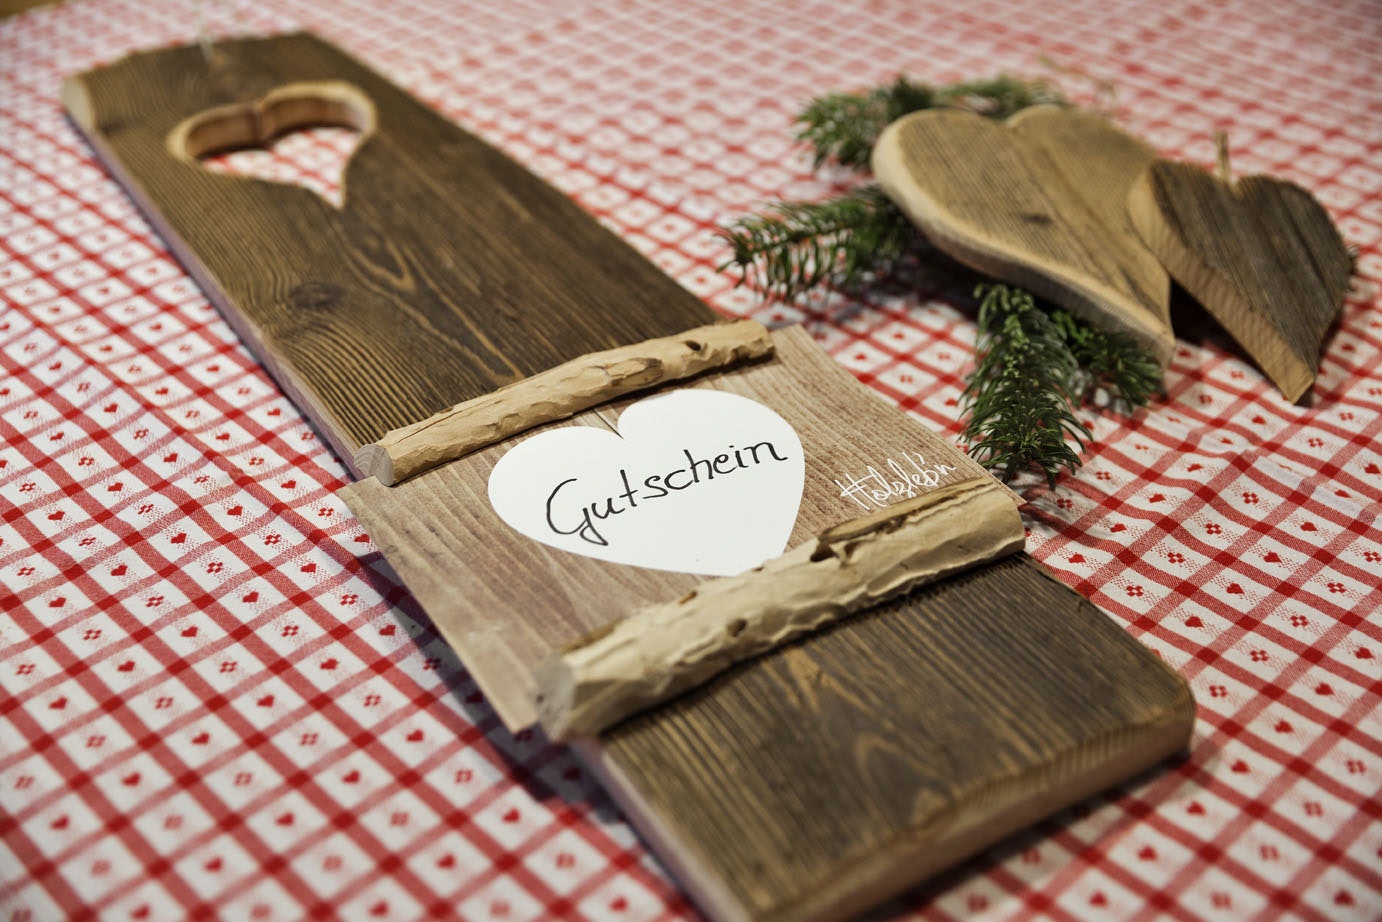 The Holzleb’n real wood voucher – the very special voucher by post